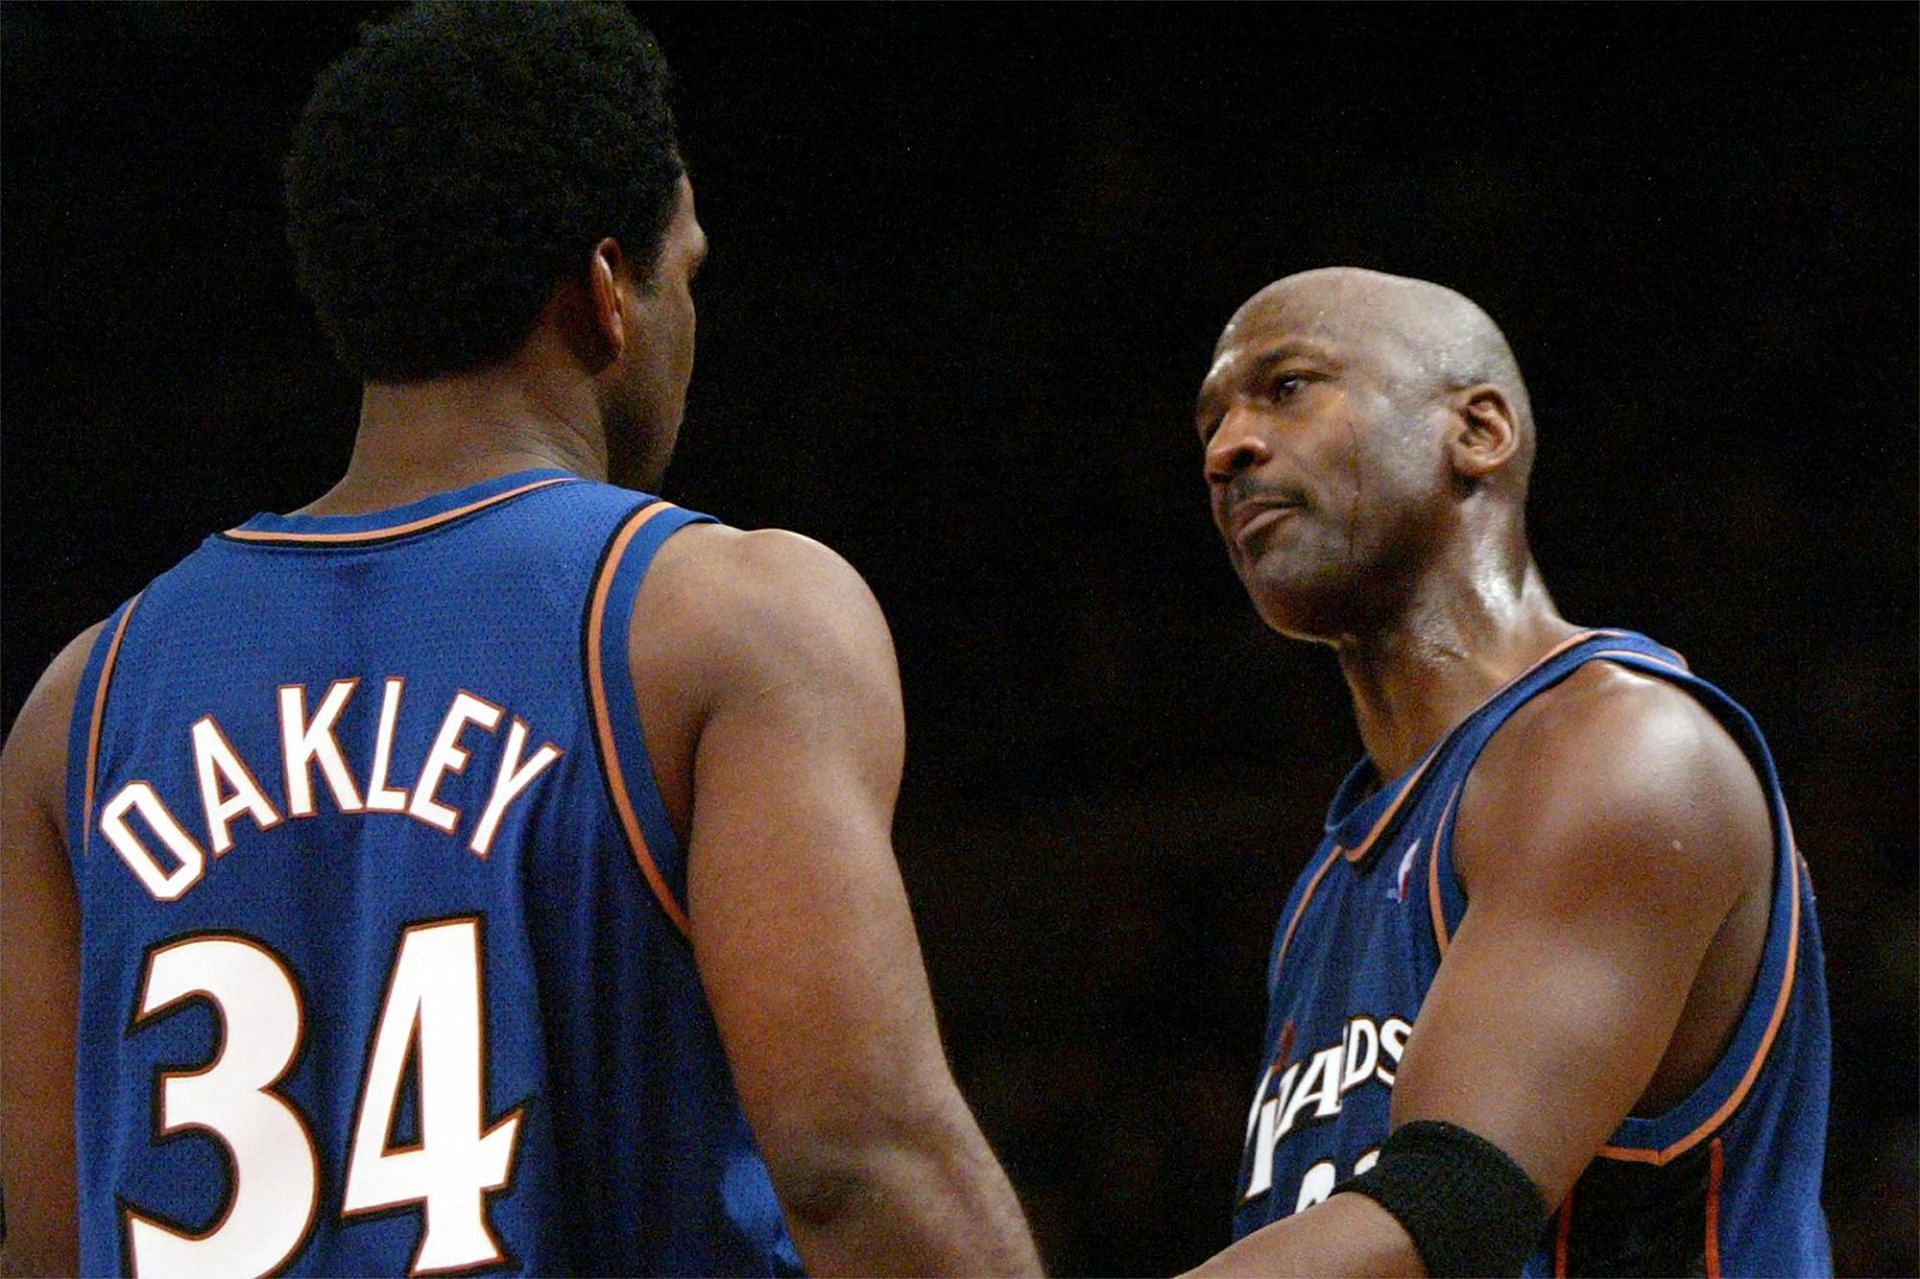 Michael Jordan and Charles Oakley have remained close friends through the years [Photo: New York Post]